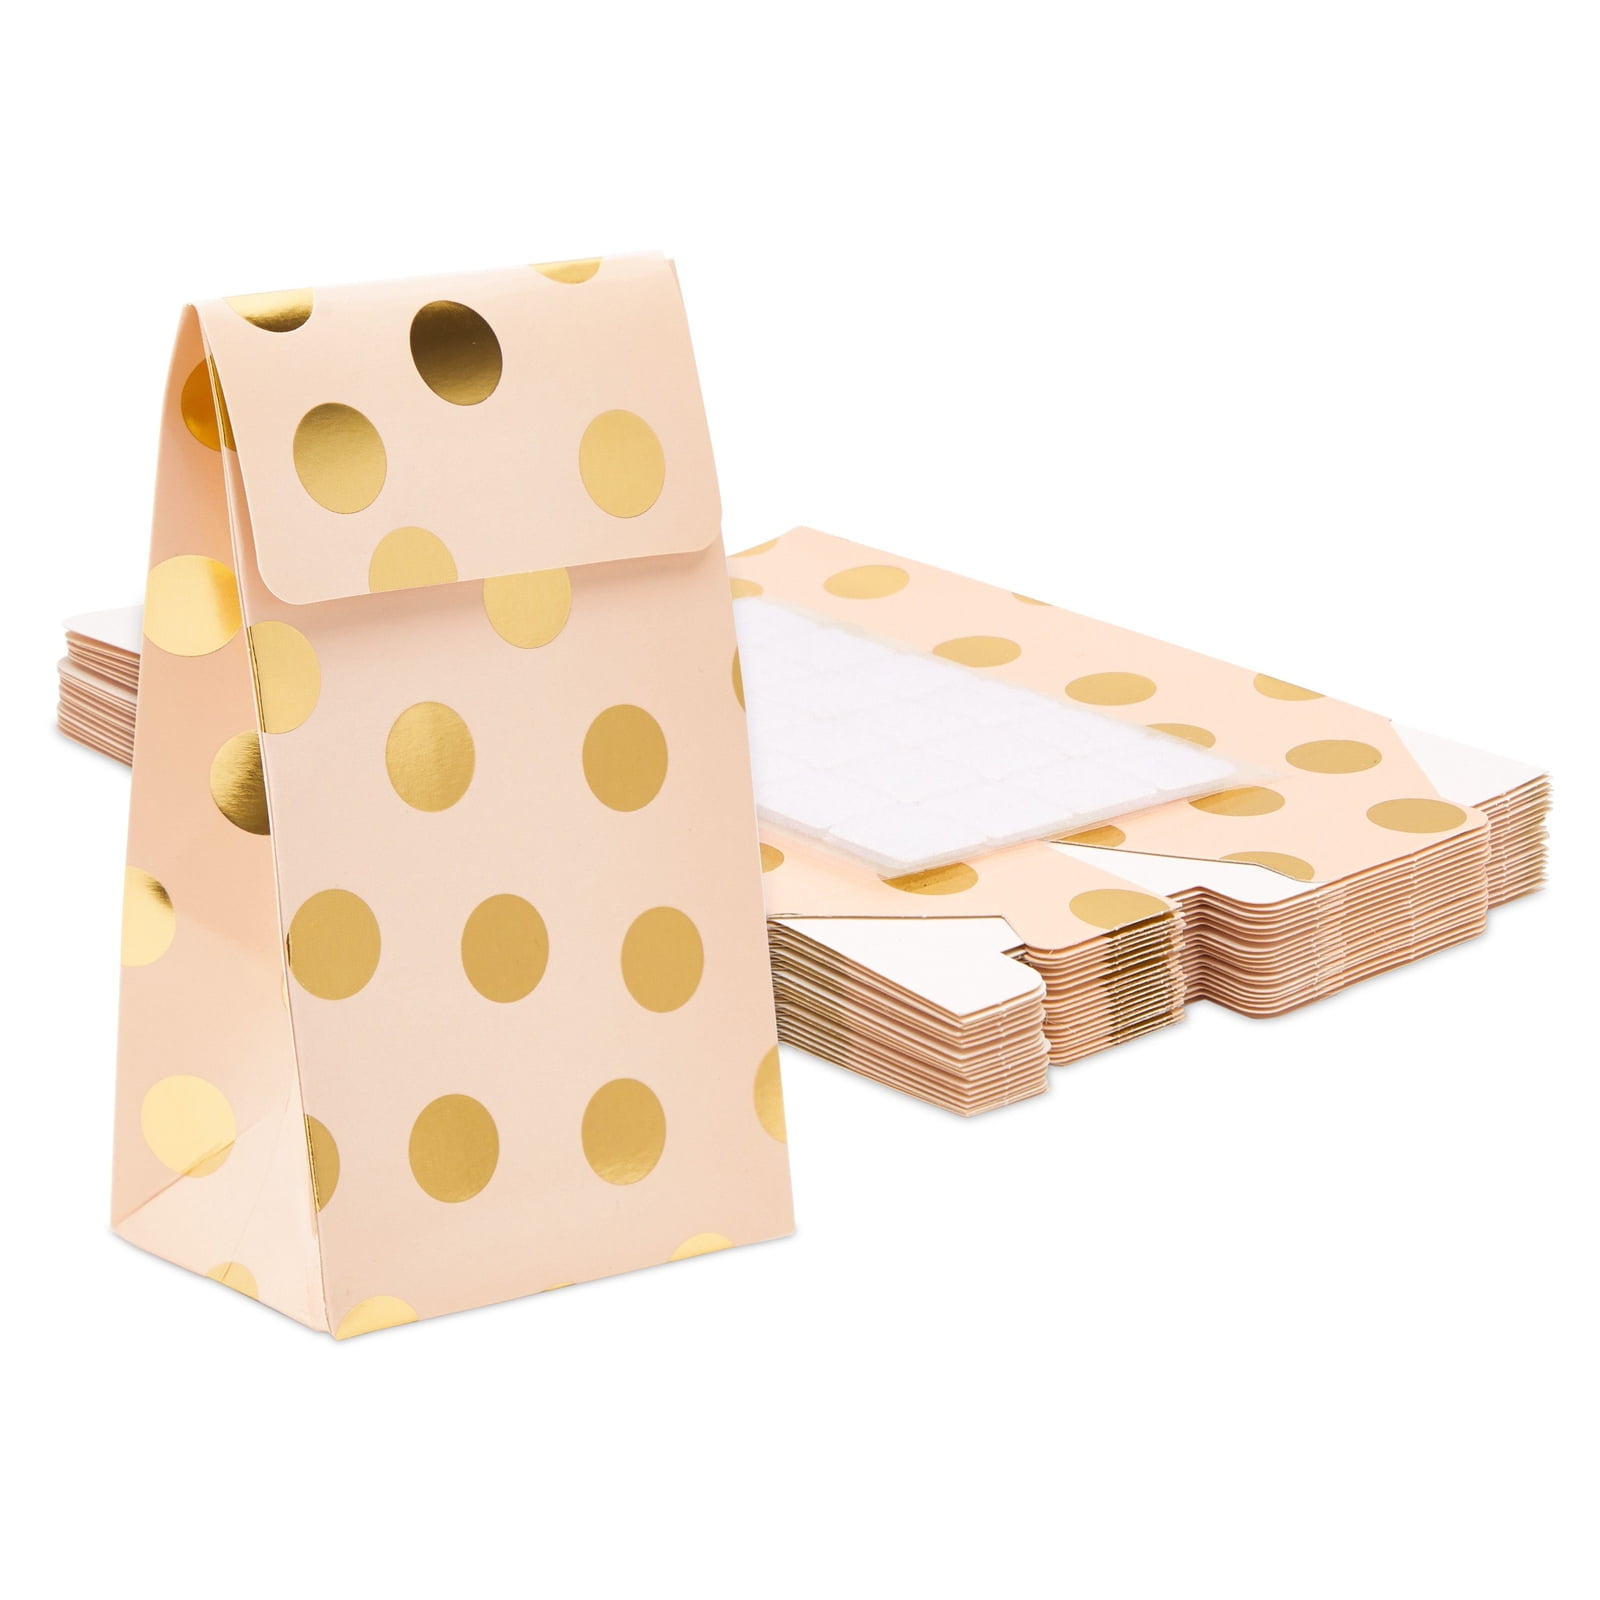 6 Colors UK Polka Dot Paper Party Bags Treat Sweet Favour Gift Goody Bag